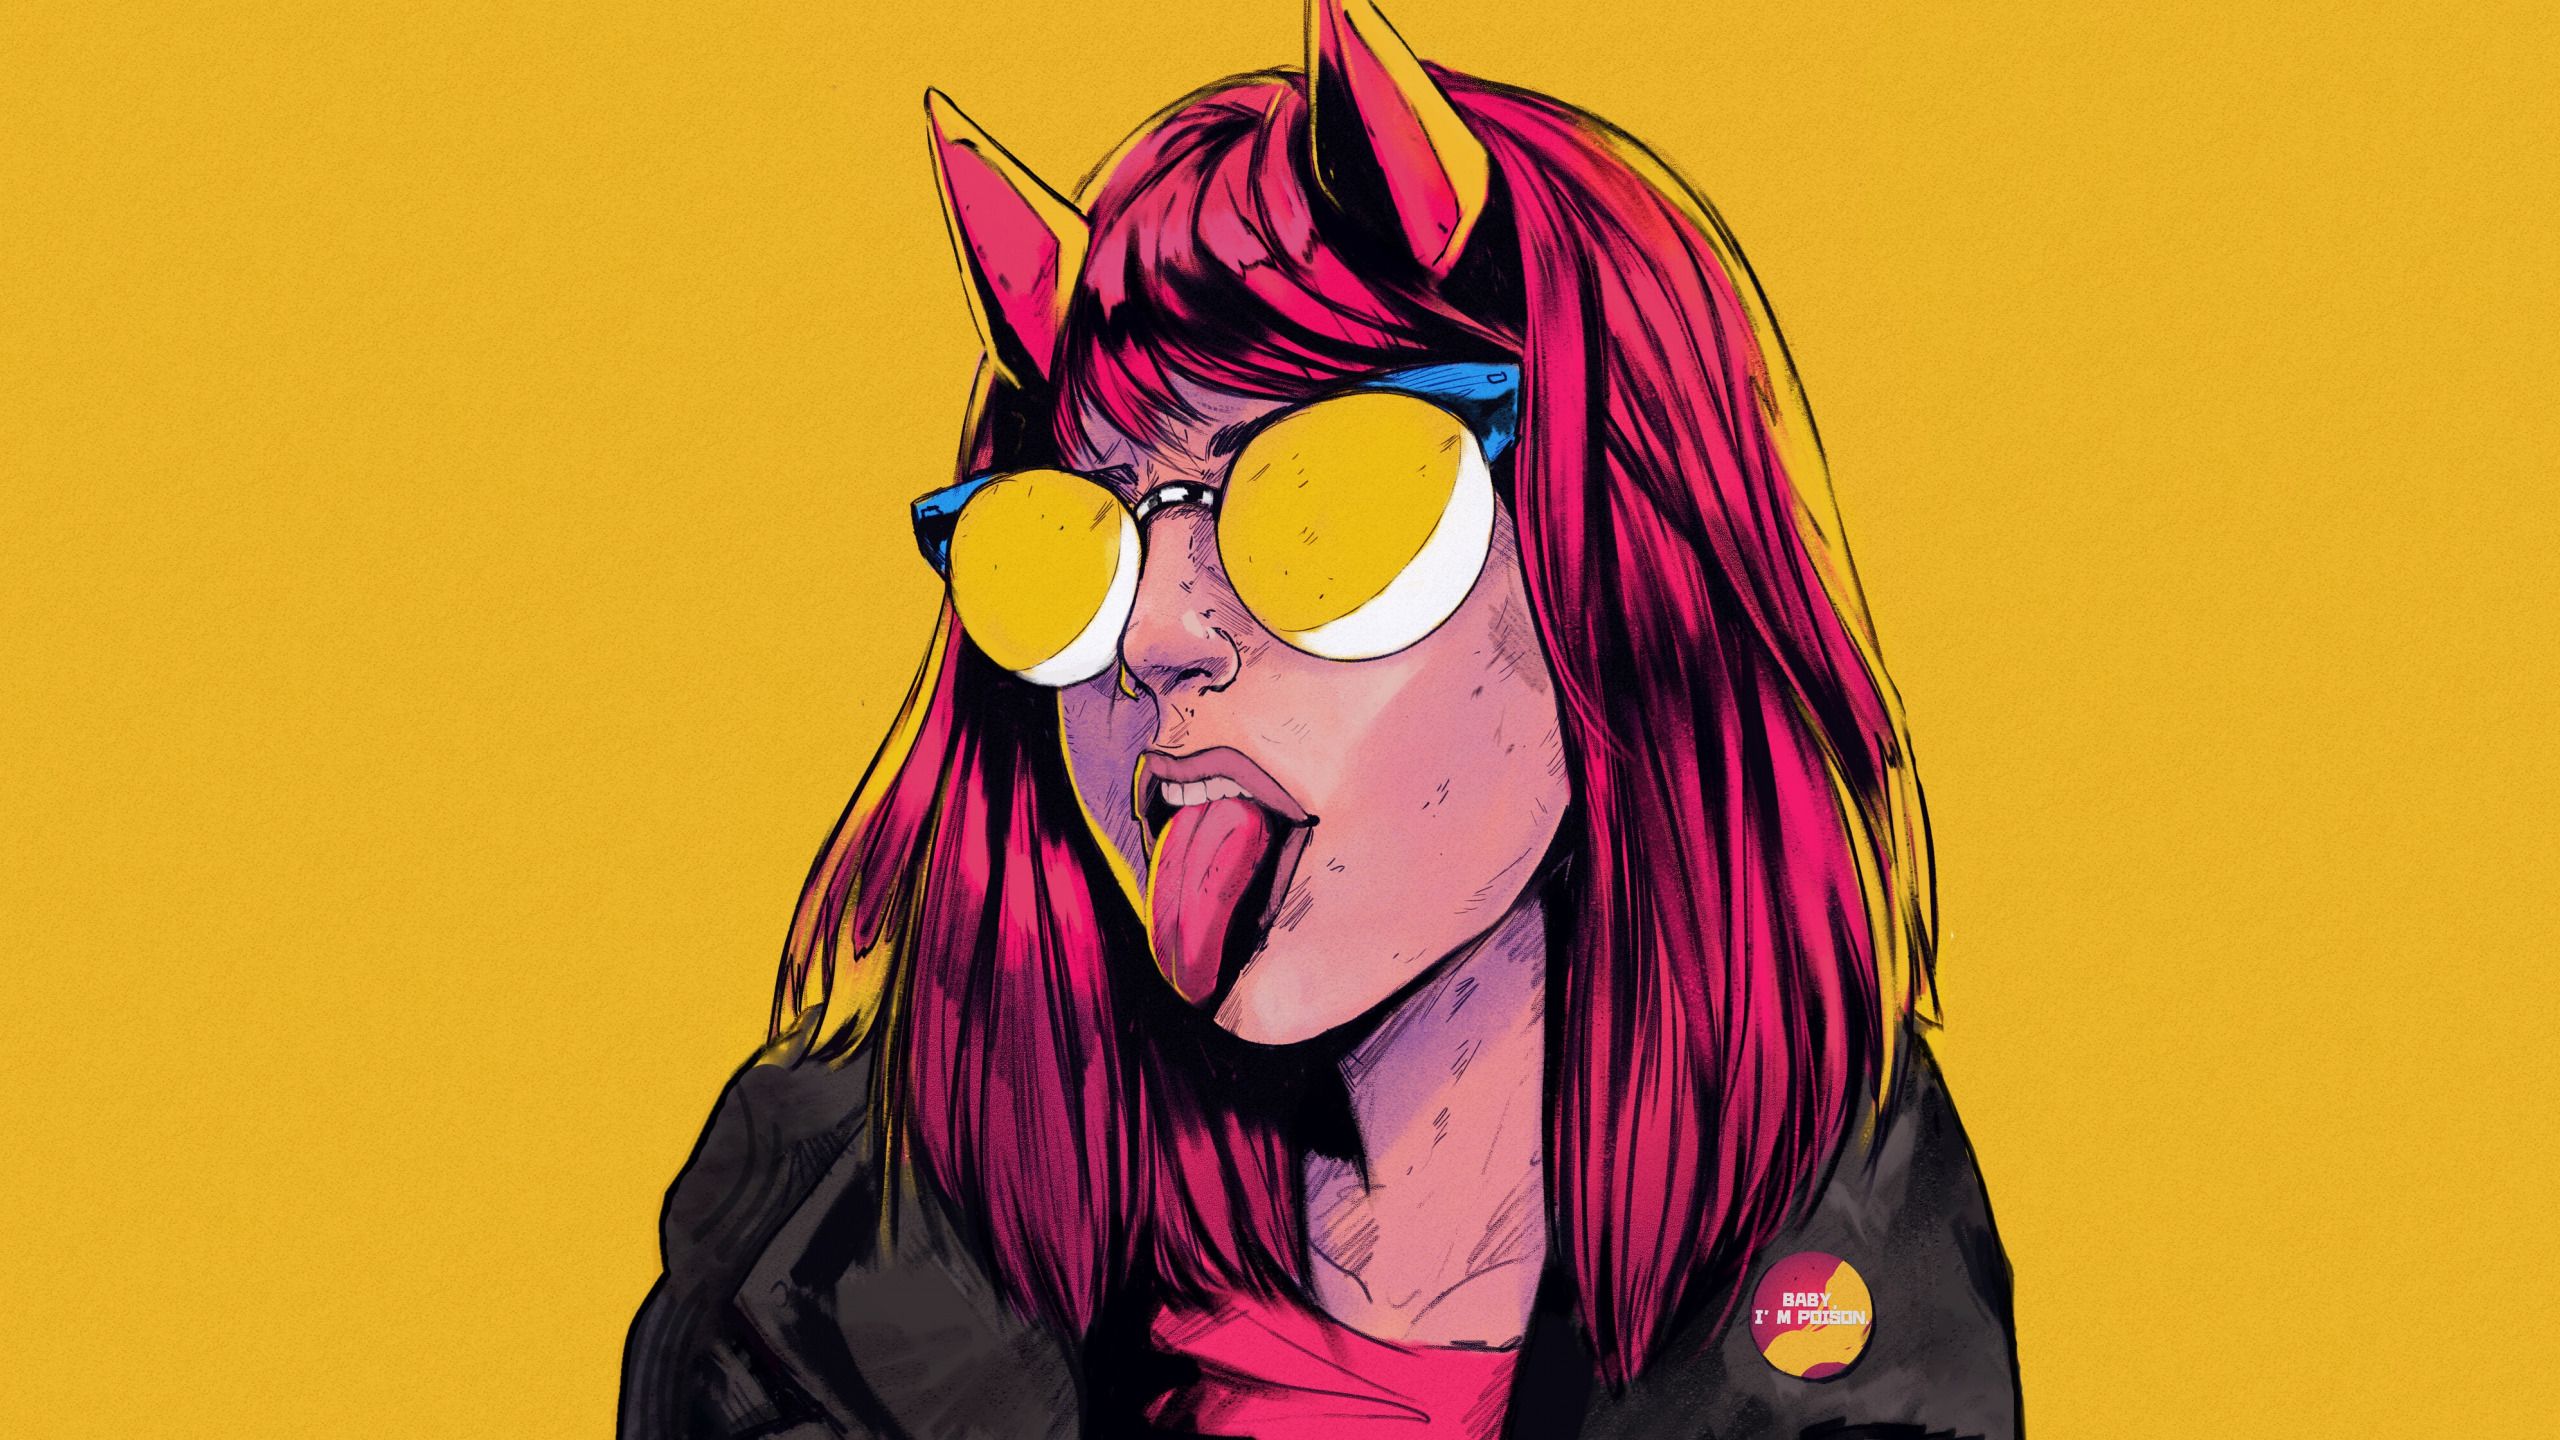 A woman with red hair and horns sticks her tongue out while wearing round sunglasses. - 2560x1440